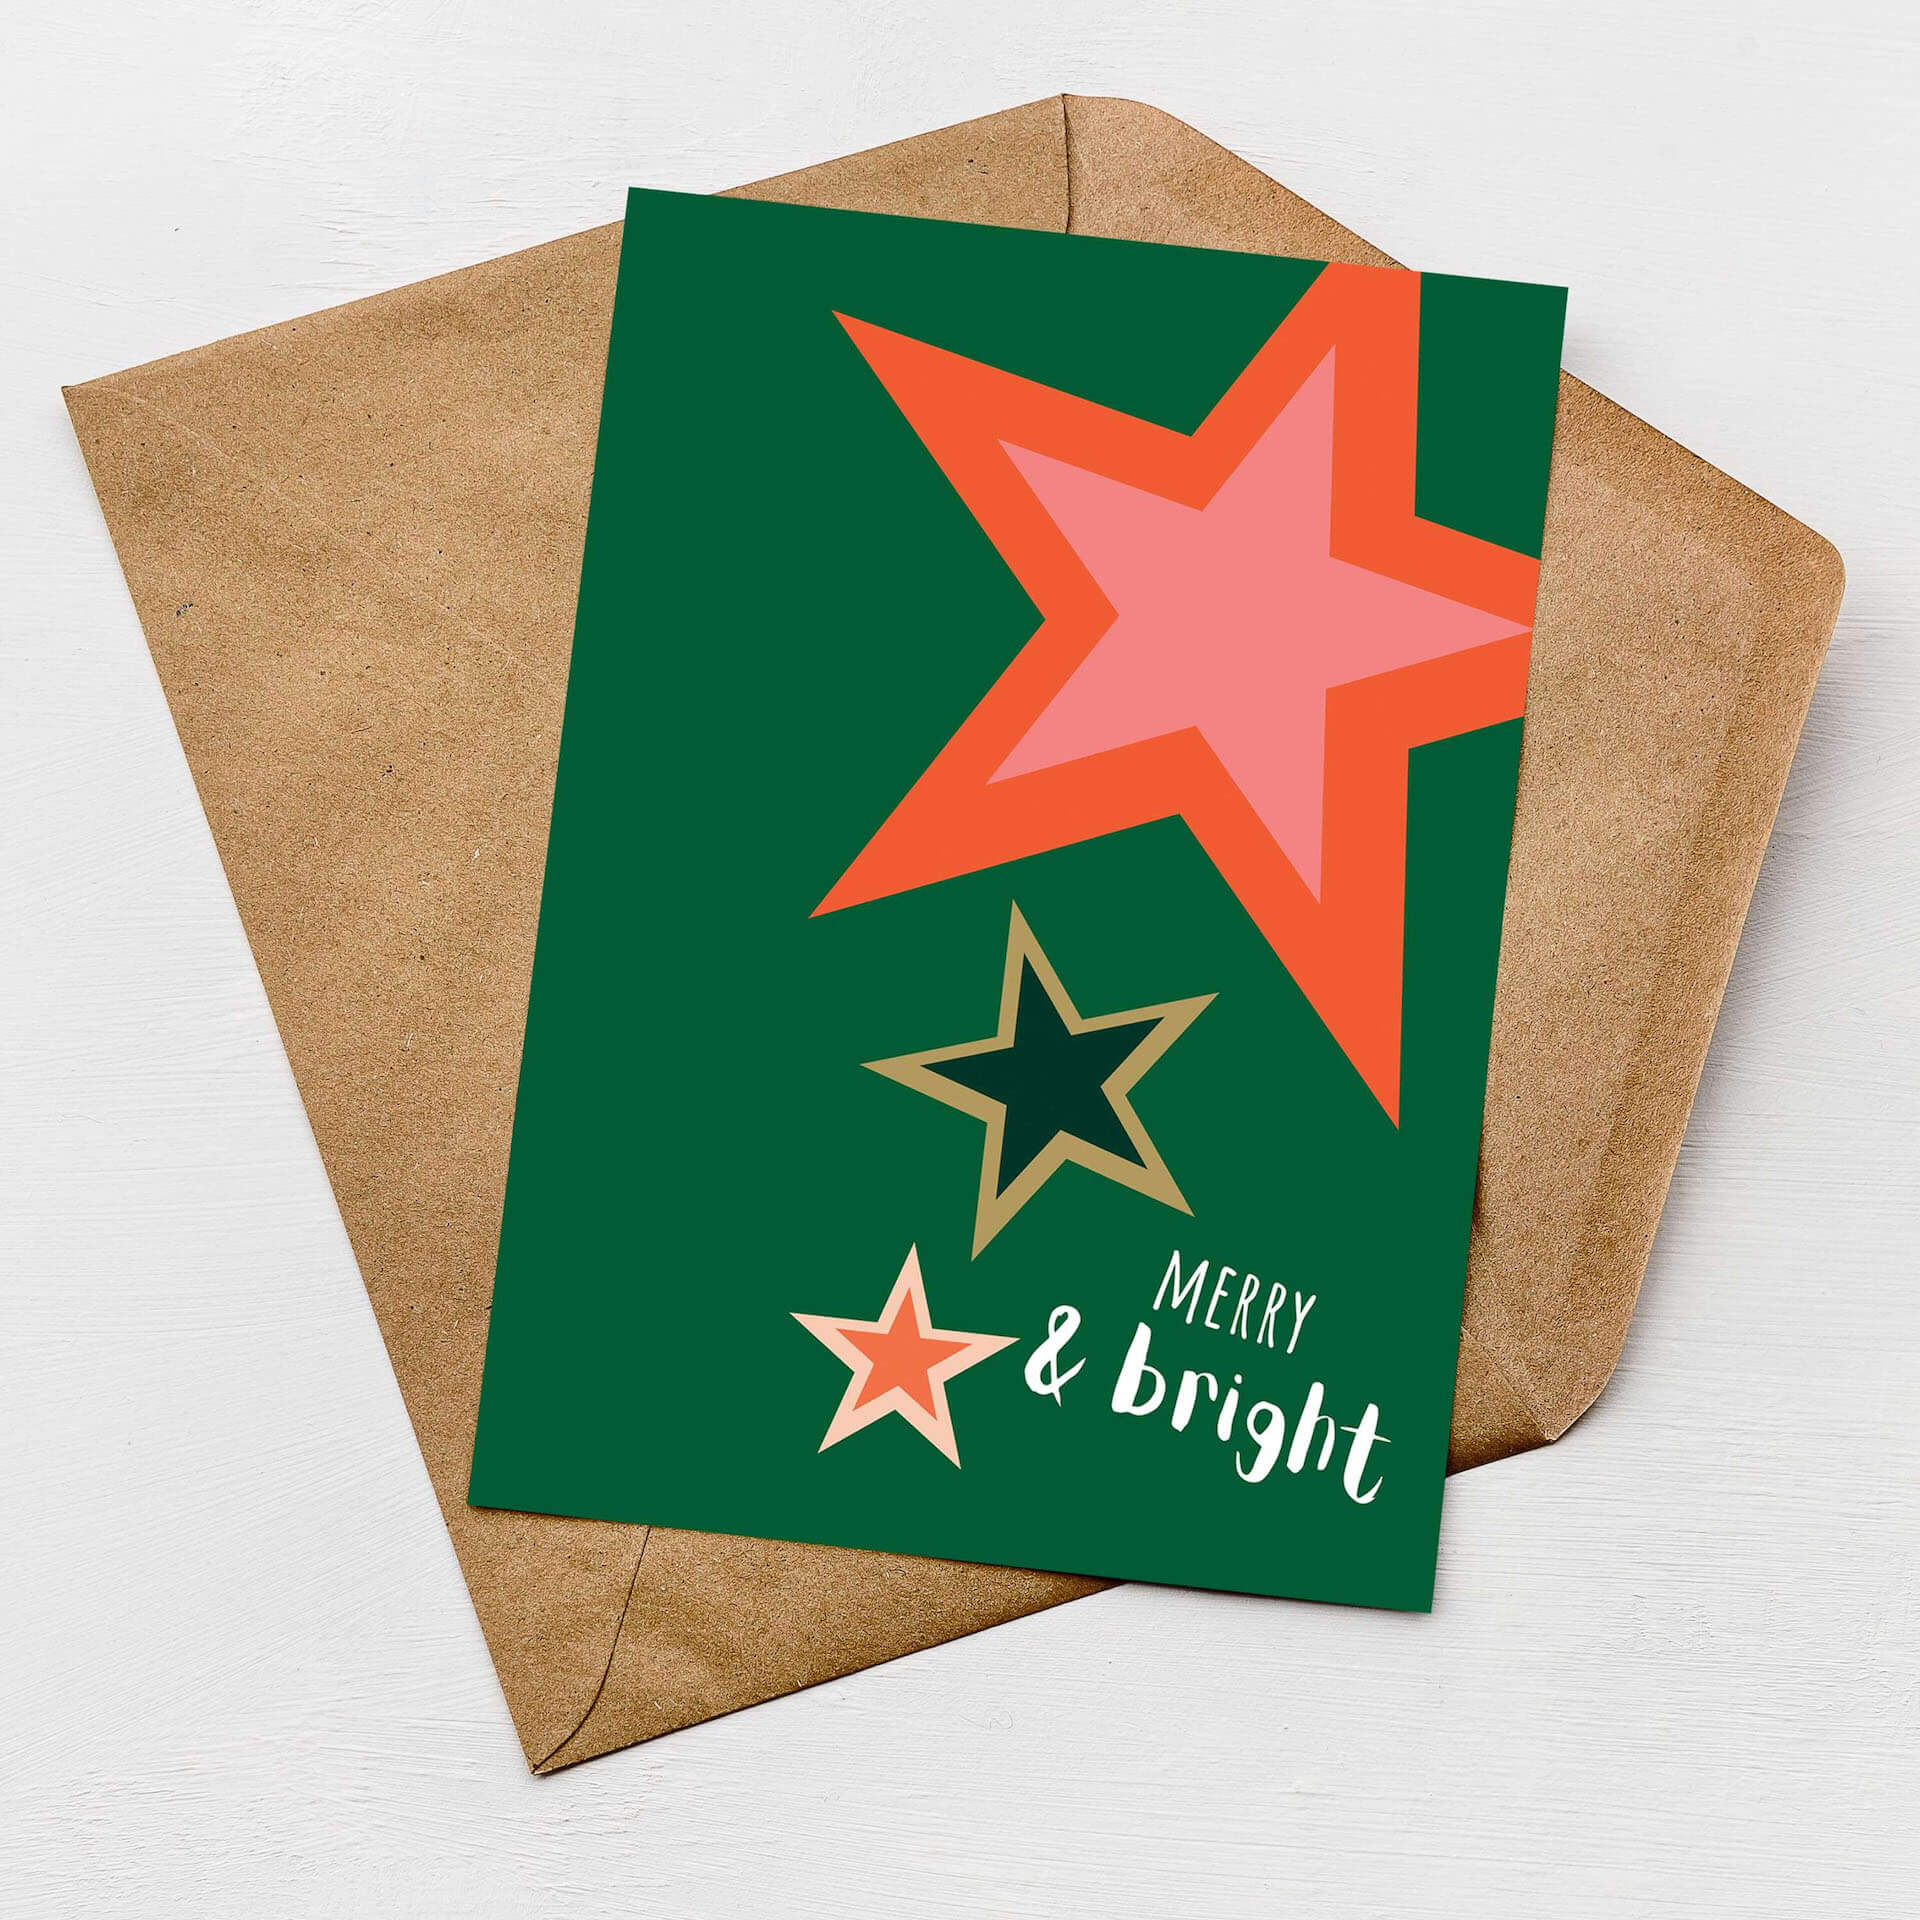 Greenwich Paper Studio Greetings Card Merry & Bright Xmass Card Pack